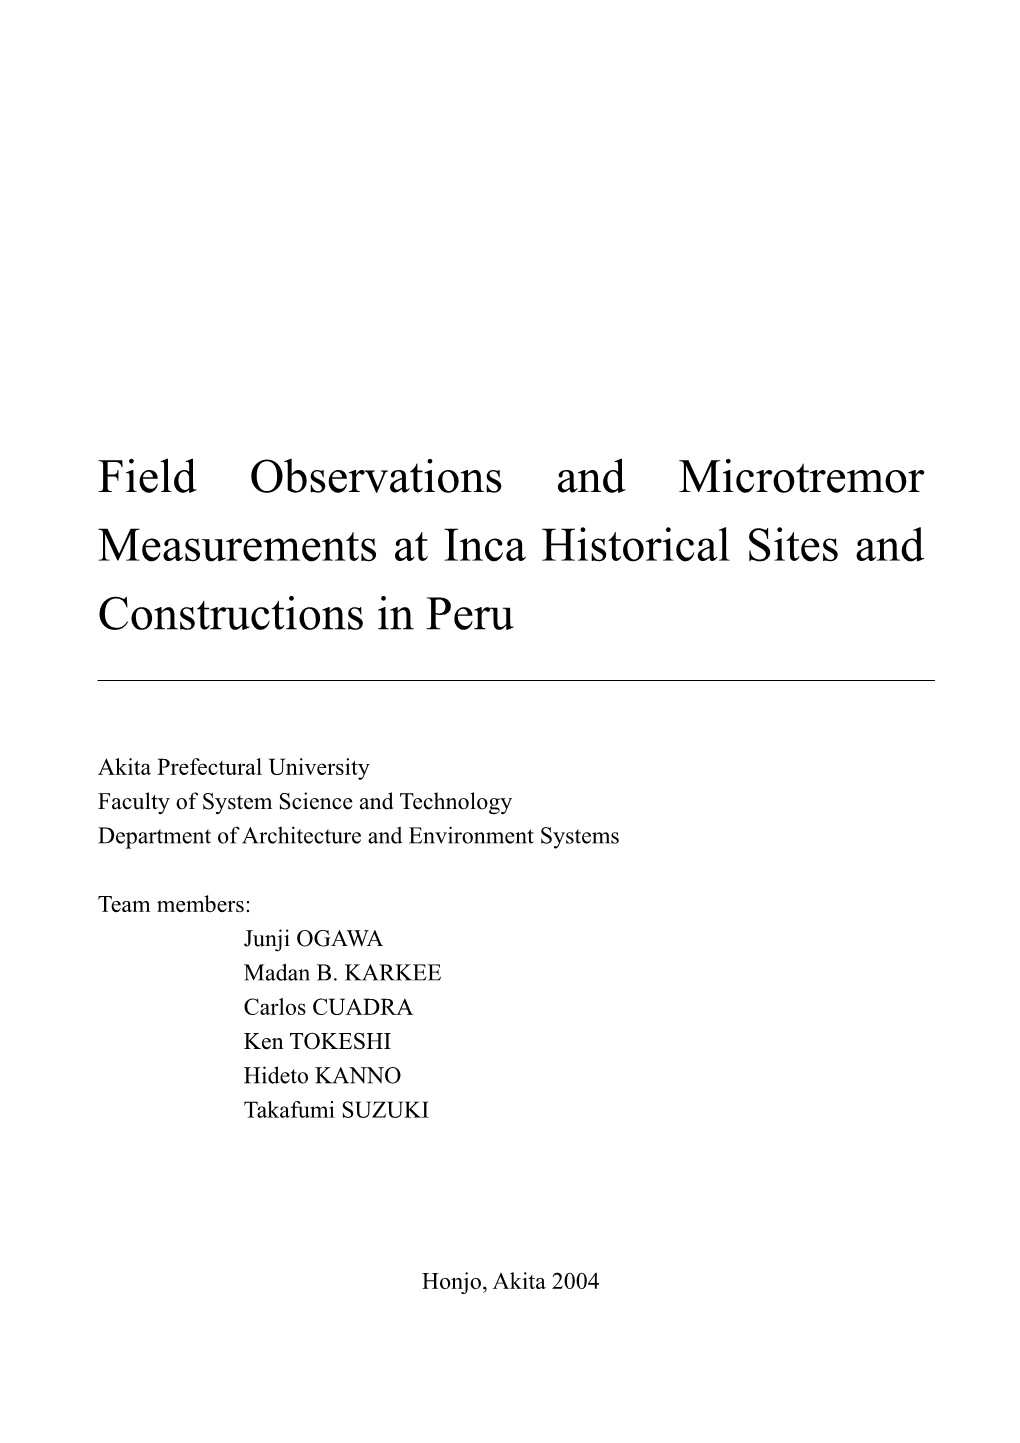 Field Observations and Microtremor Measurements at Inca Historical Sites and Constructions in Peru